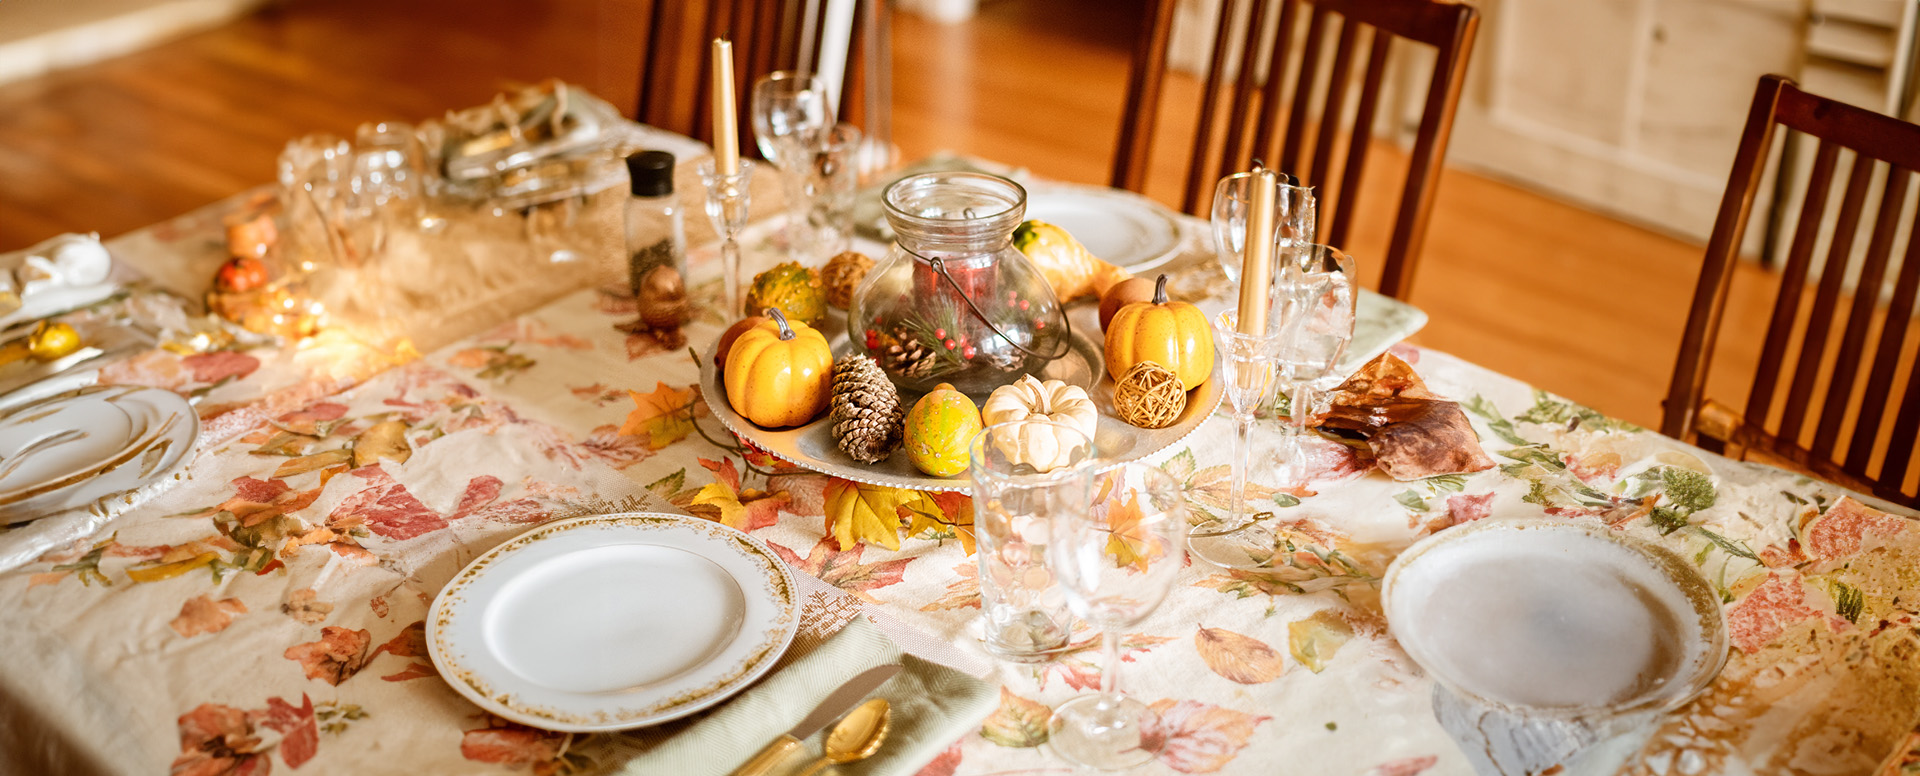 Decorating Ideas for a Festive Thanksgiving